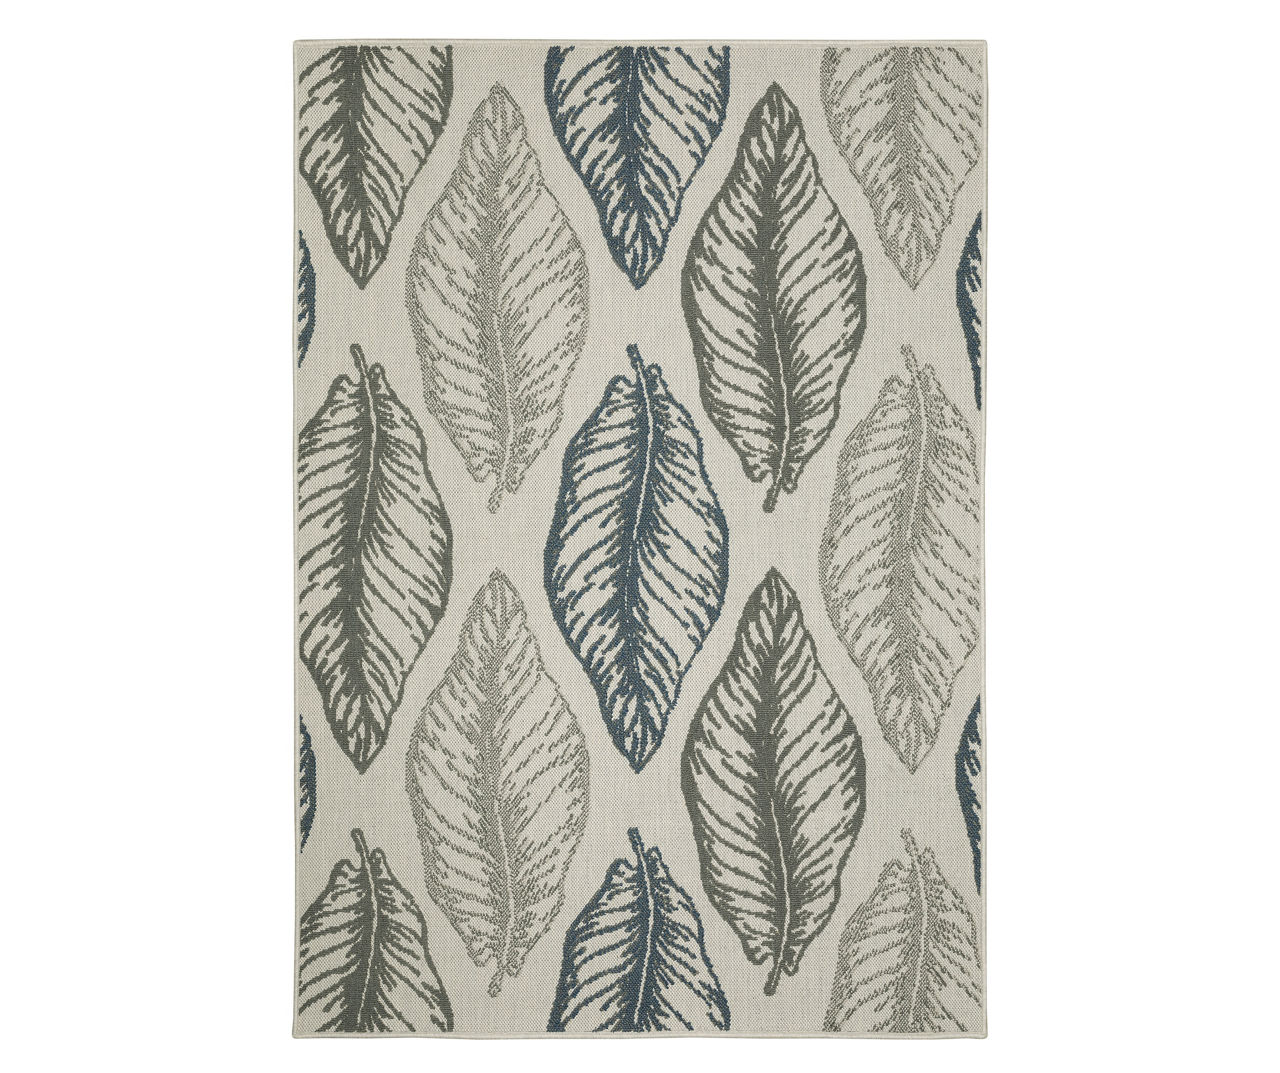 Torian Beige, Green & Blue Leaves Outdoor Area Rug, (1.1' x 3.9')